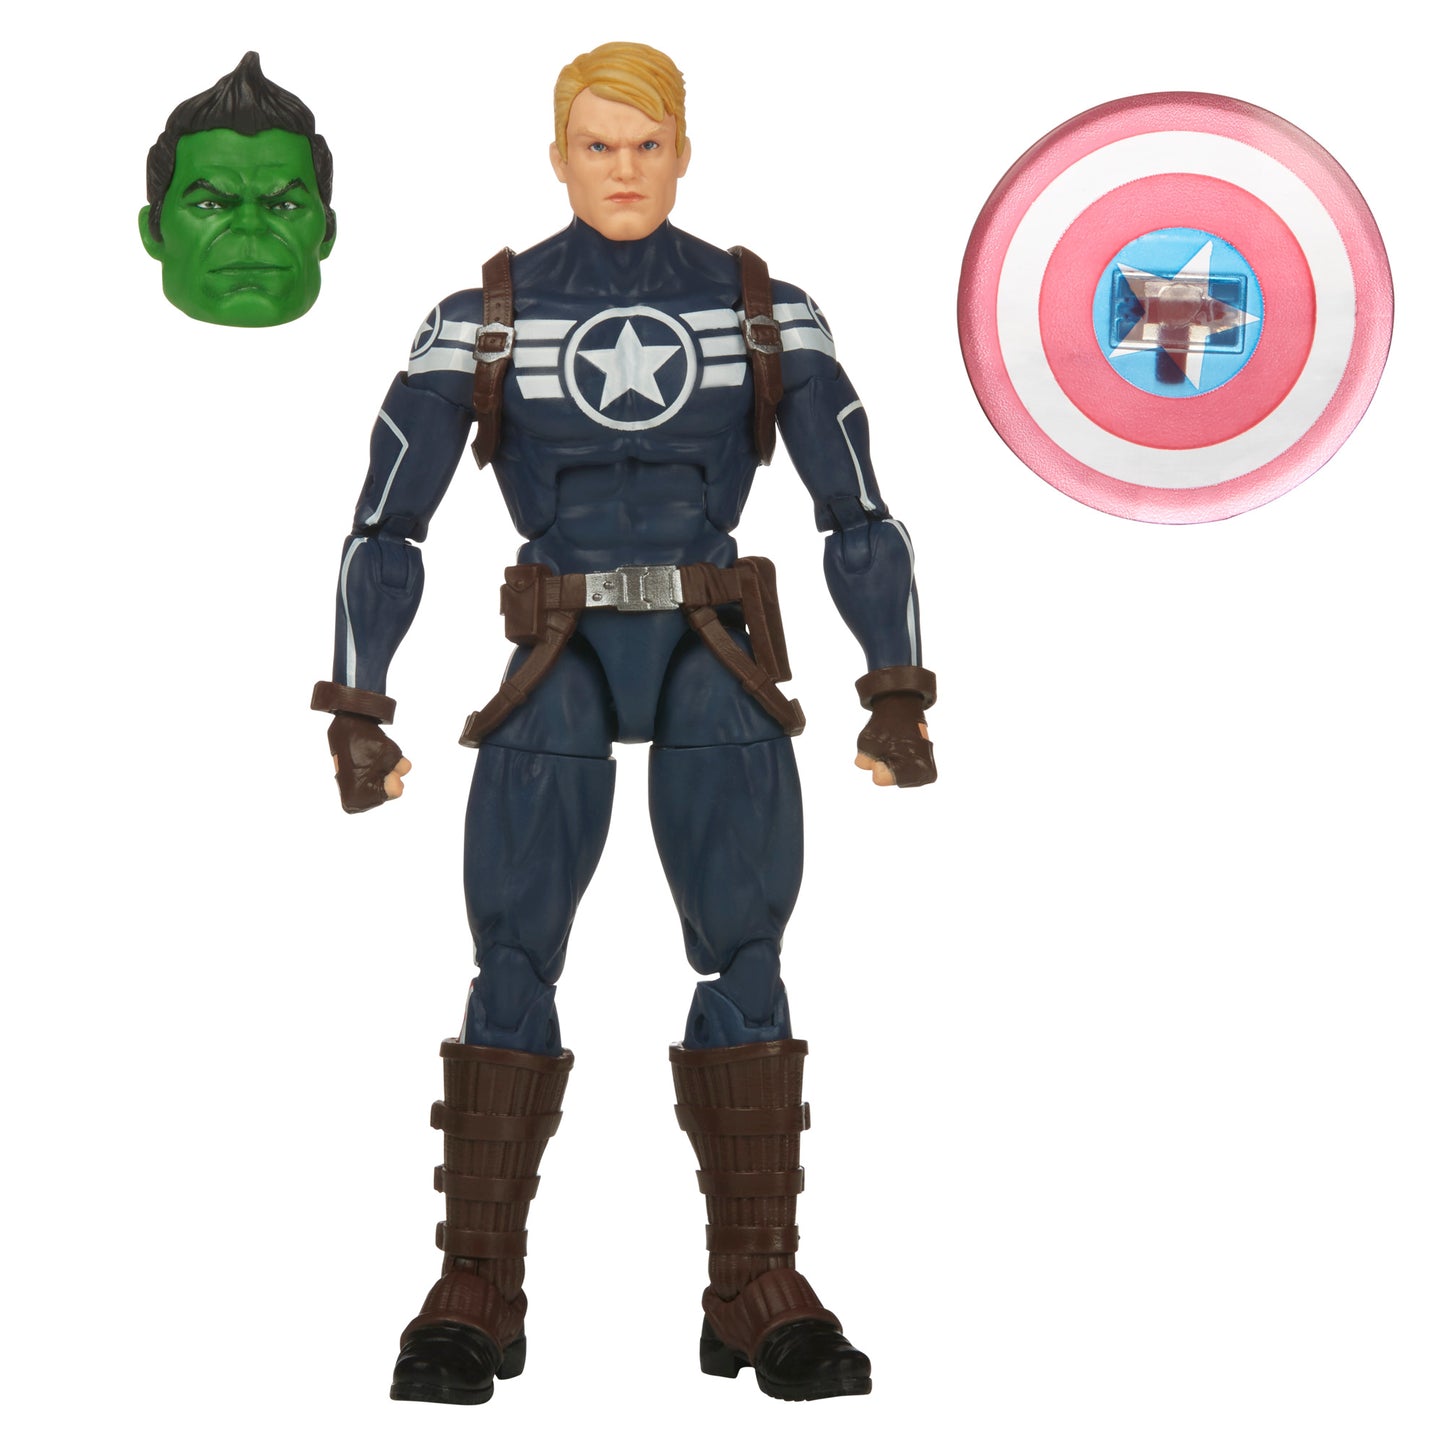 Marvel Comics Commander Rogers Action Figure with accessories - Heretoserveyou